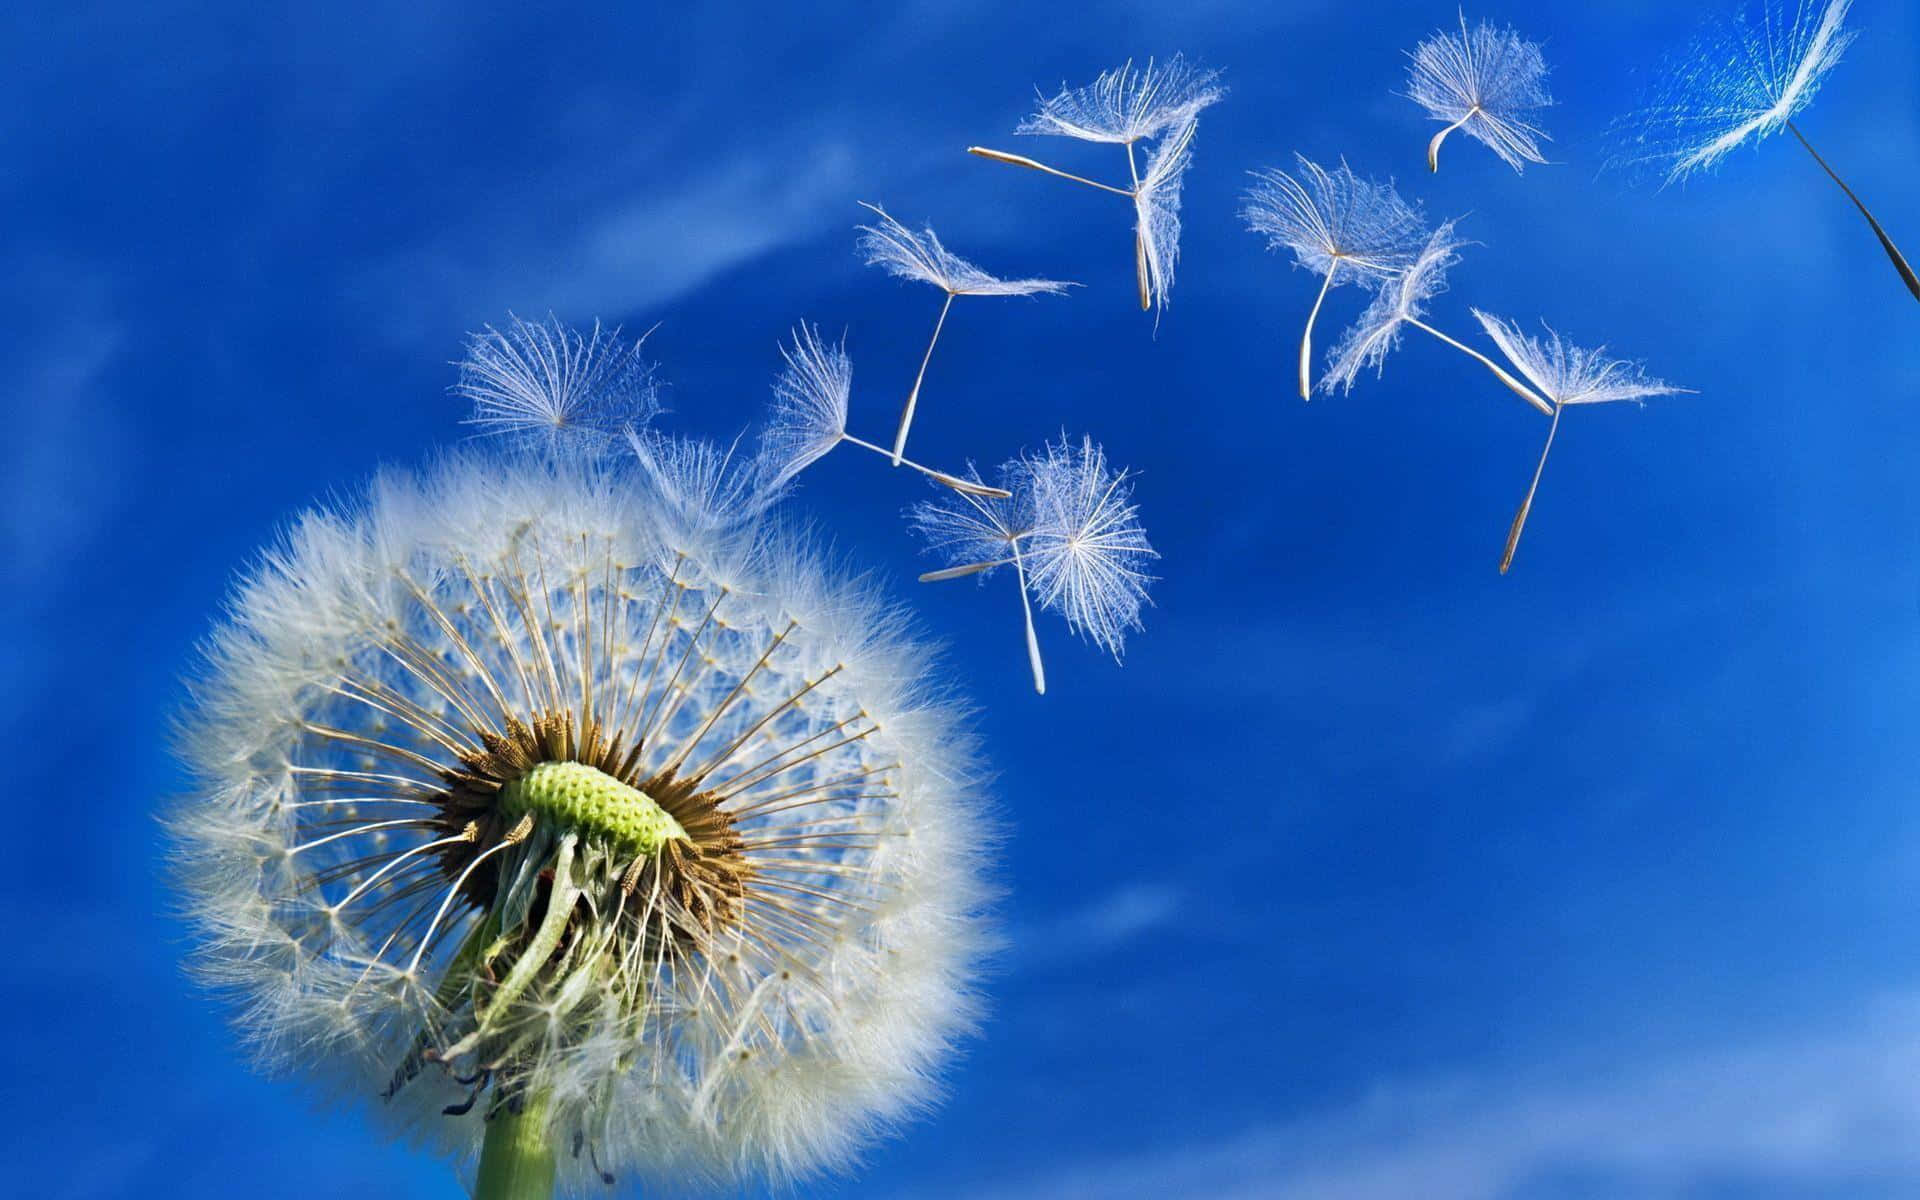 "Watching the Dandelion’s Seeds Fly Away"